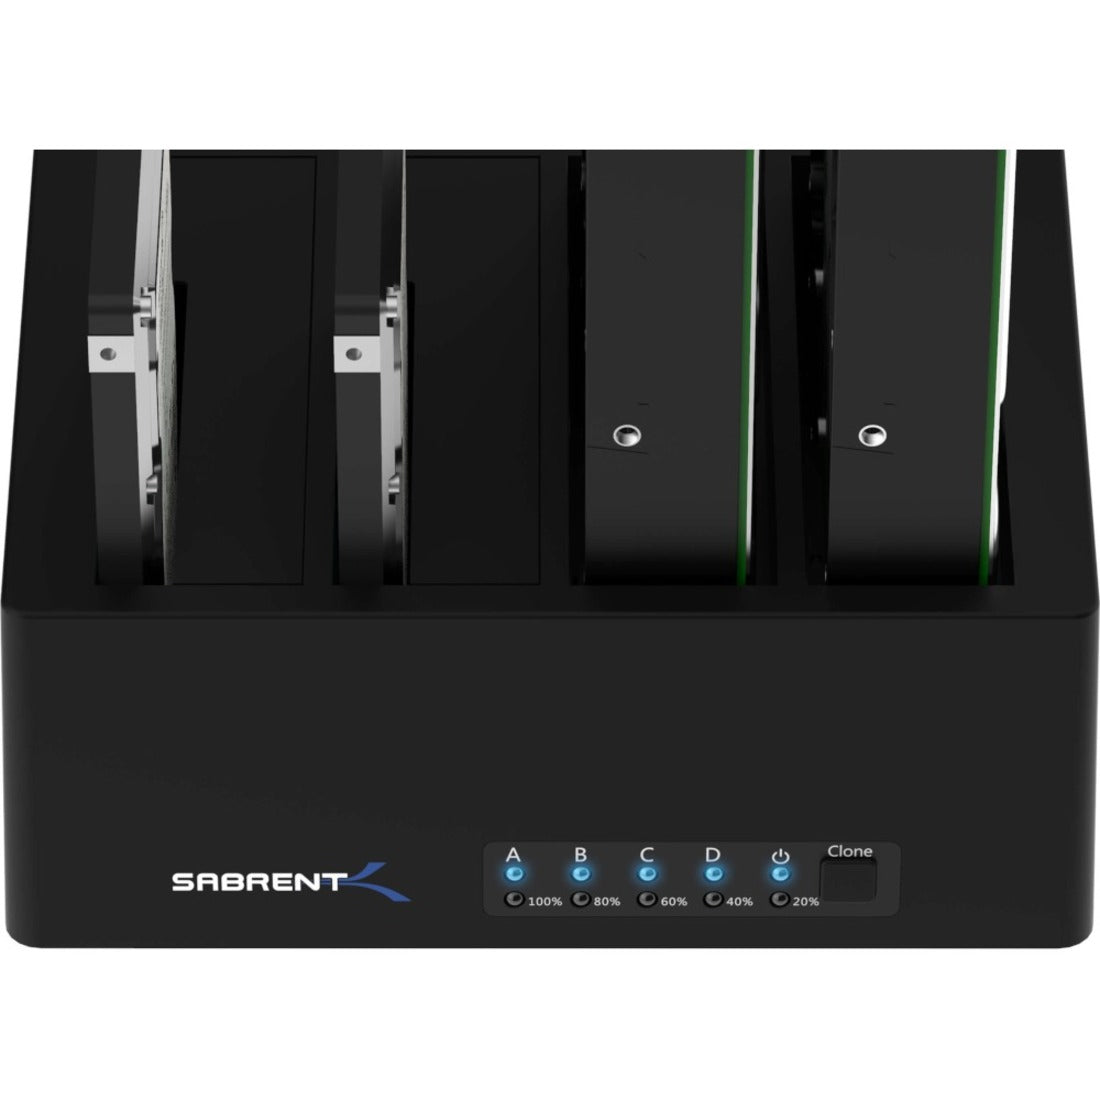 Sabrent DS-U3B4 4-Bay USB 3.0 SATA Docking Station, Hot Swappable, for PC and Mac, Black